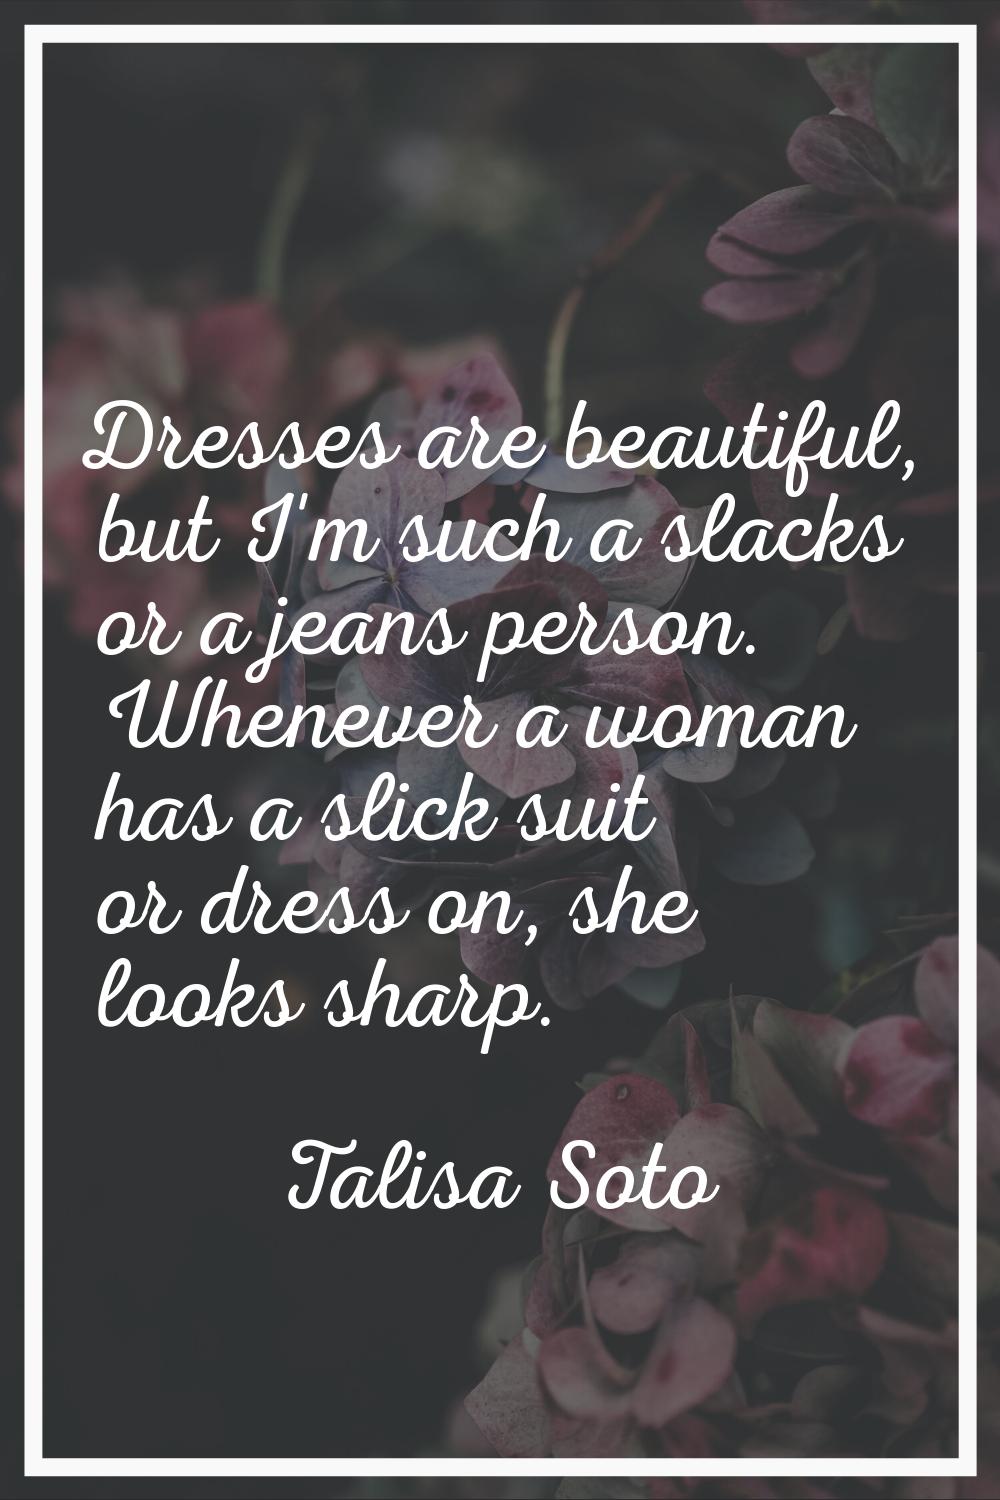 Dresses are beautiful, but I'm such a slacks or a jeans person. Whenever a woman has a slick suit o